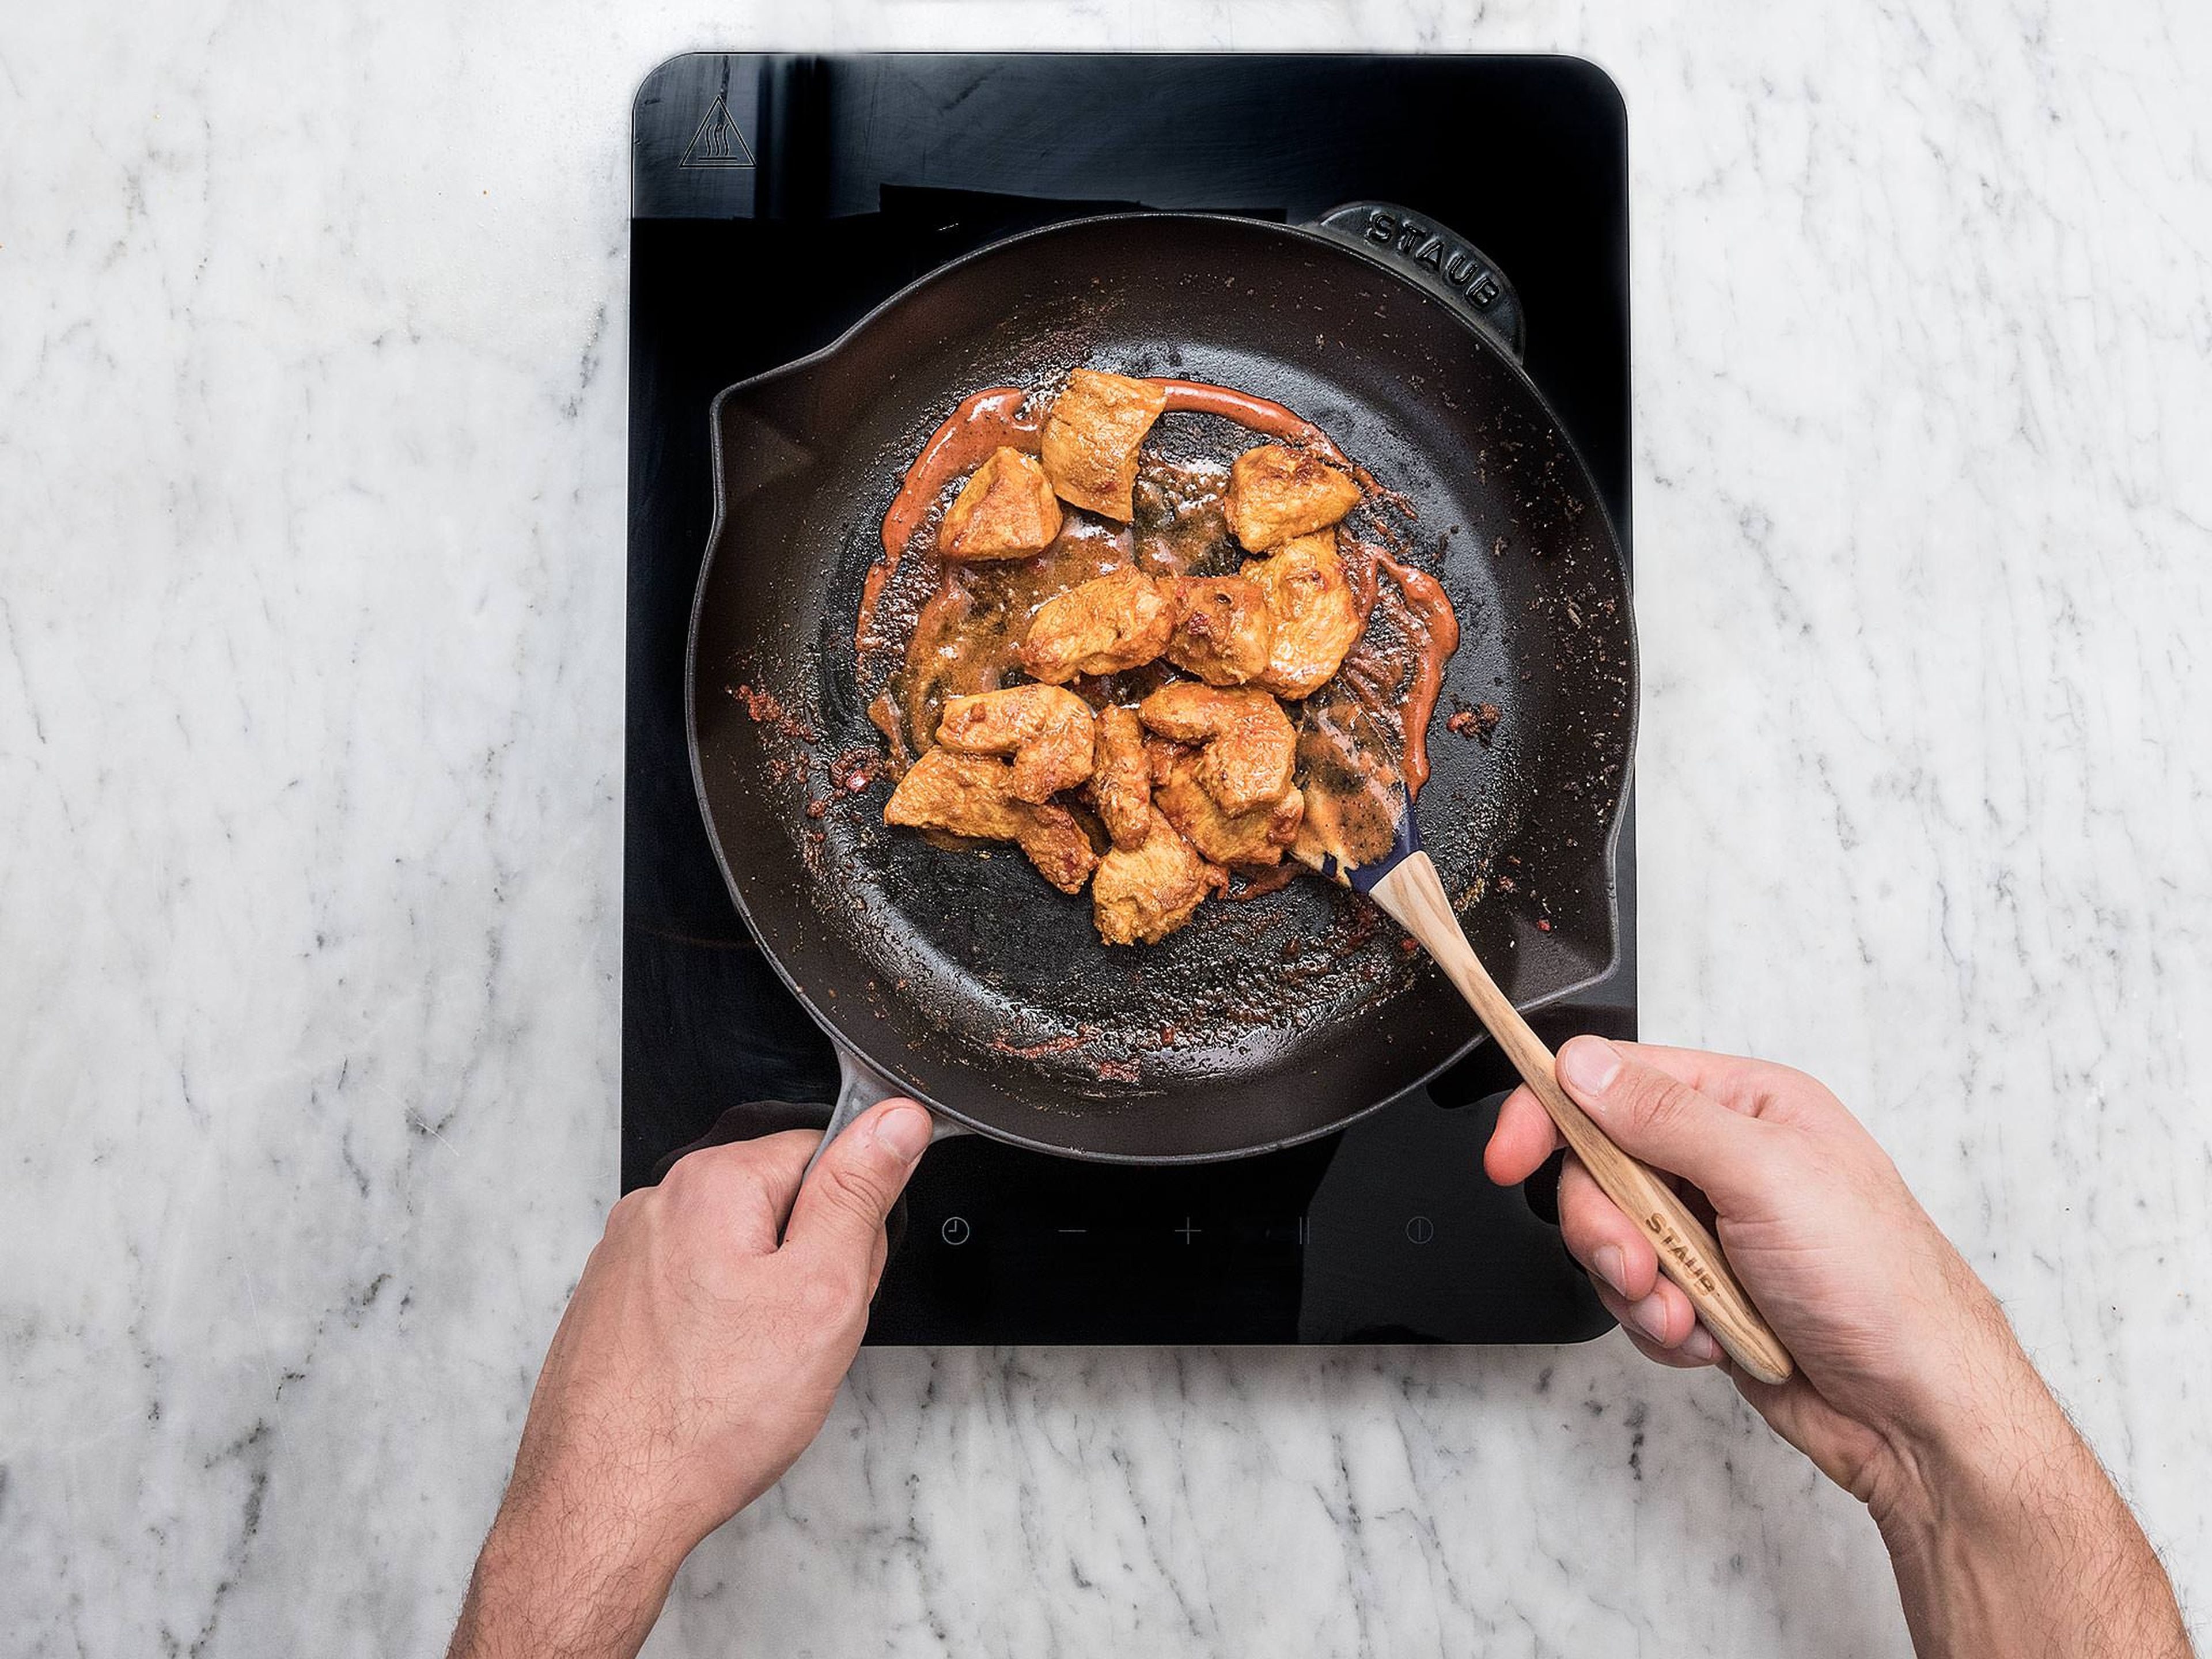 Heat oil in a pan over medium-high heat and sauté the marinated chicken for approx. 3 – 4 min. until cooked through. Remove chicken from pan.